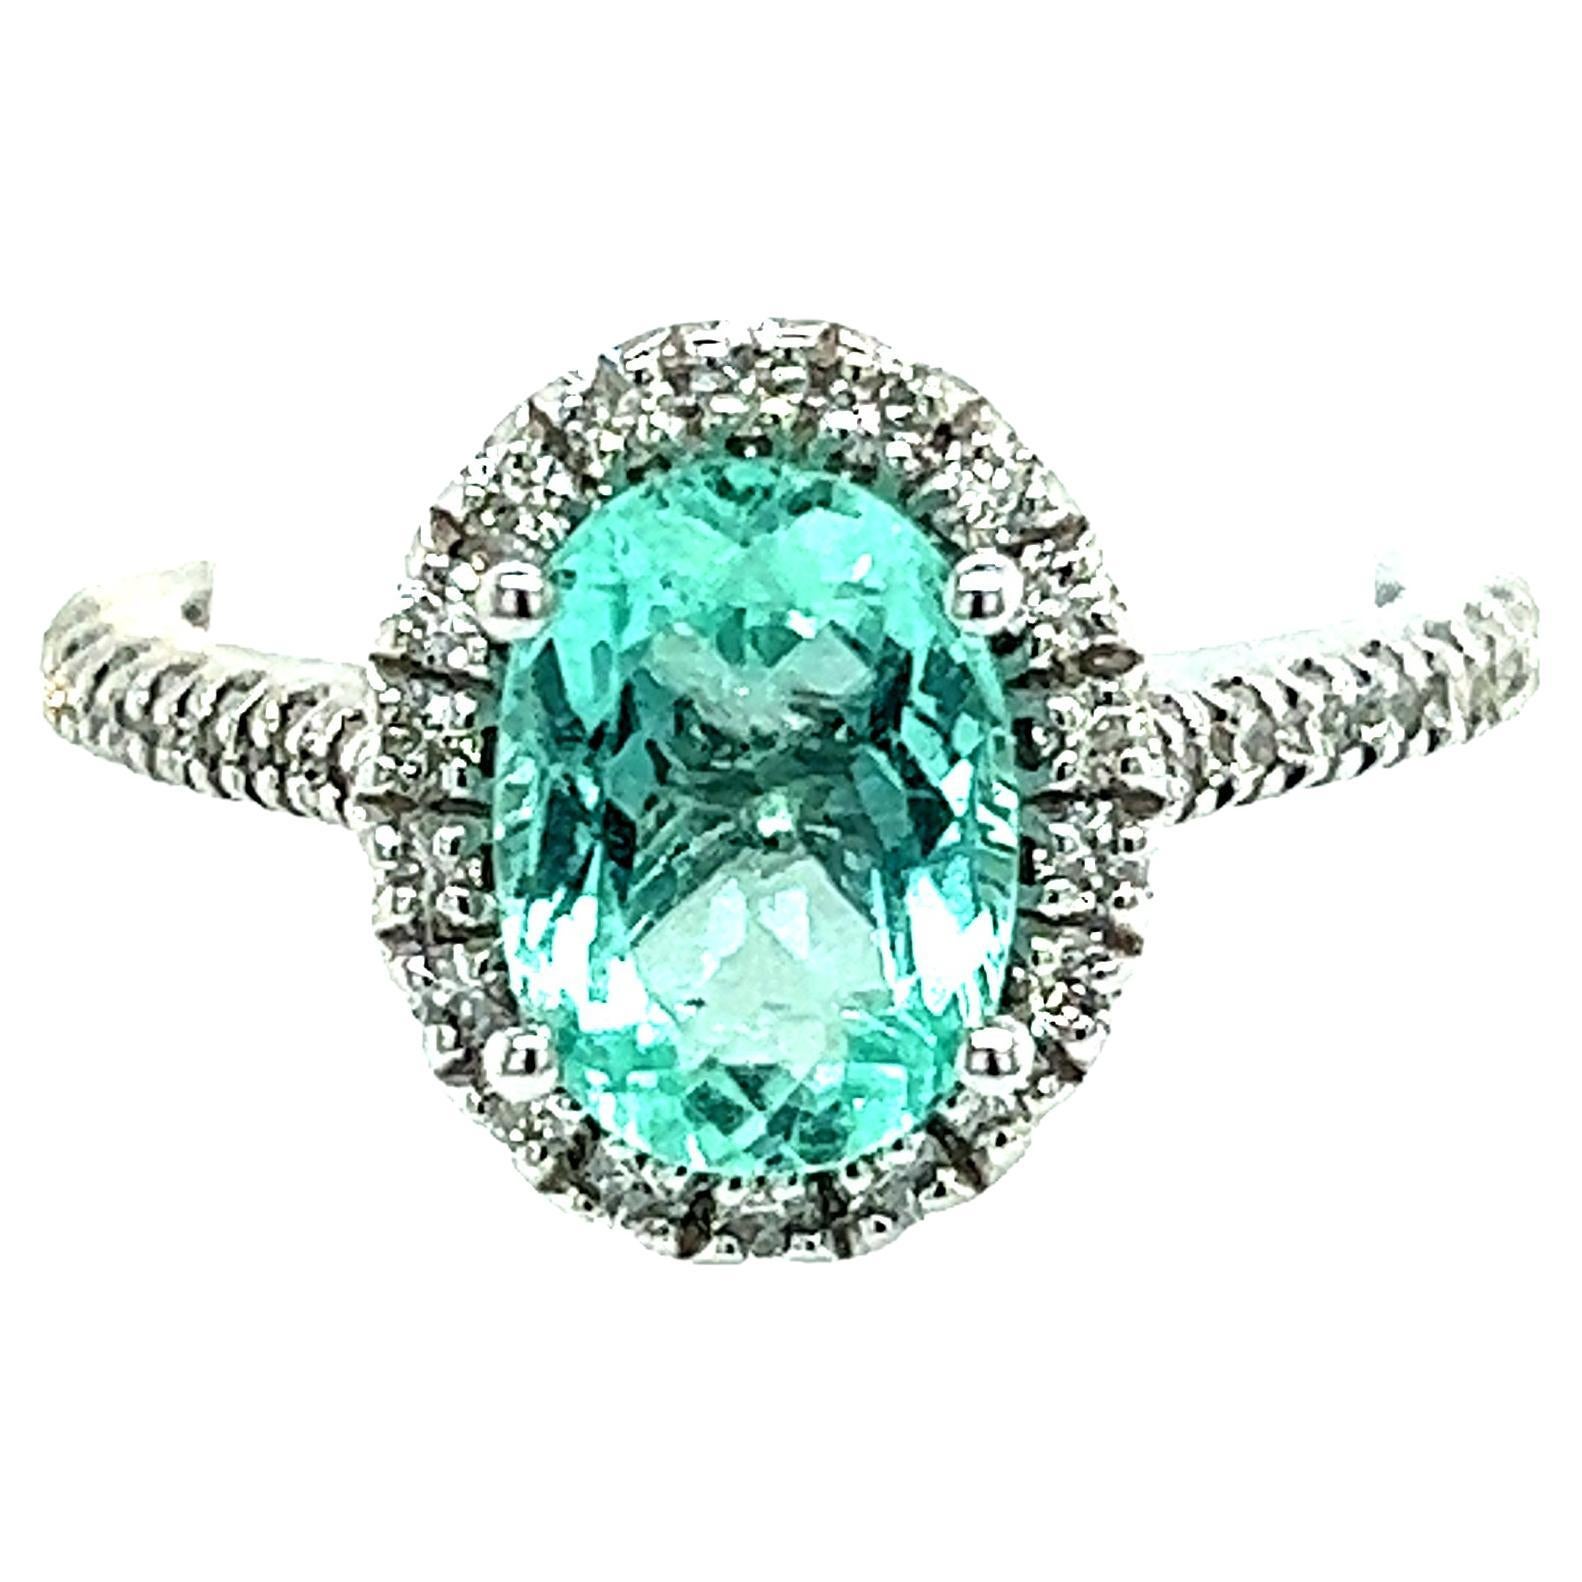 Natural Colombian Emerald Diamond Ring Size 6.5 14k W Gold 2.98 TCW Certified